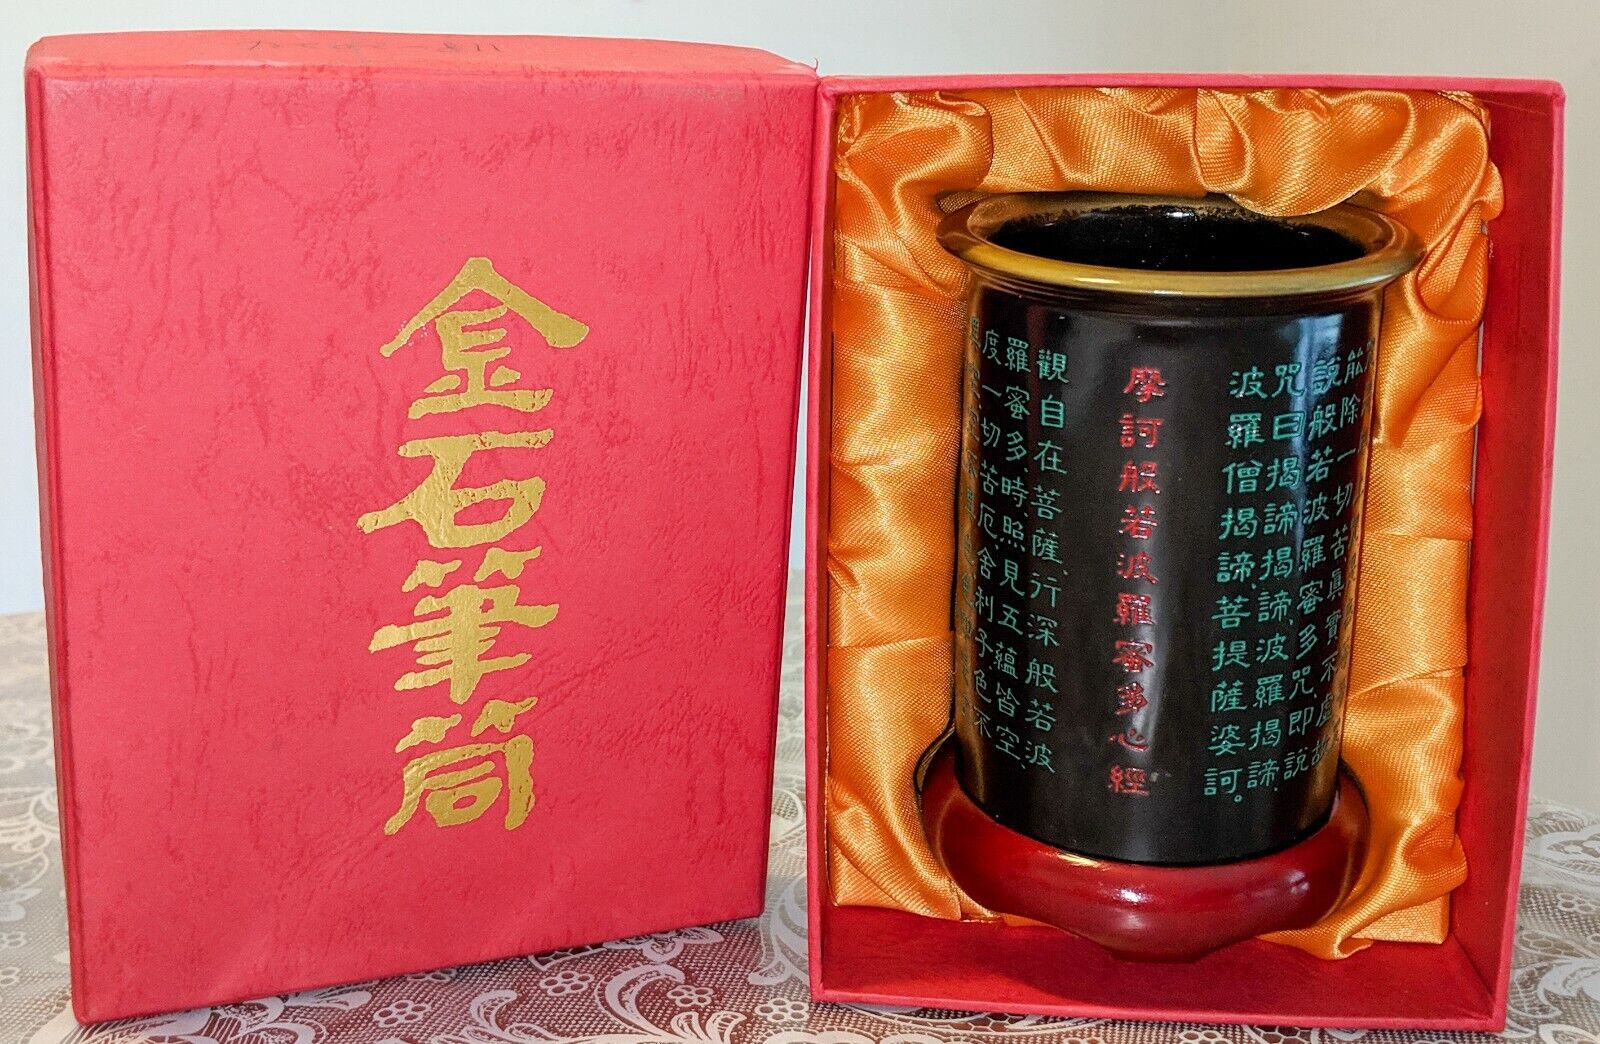 NEW Heart Sutra Engraved Cup in Red Gift Box NIB